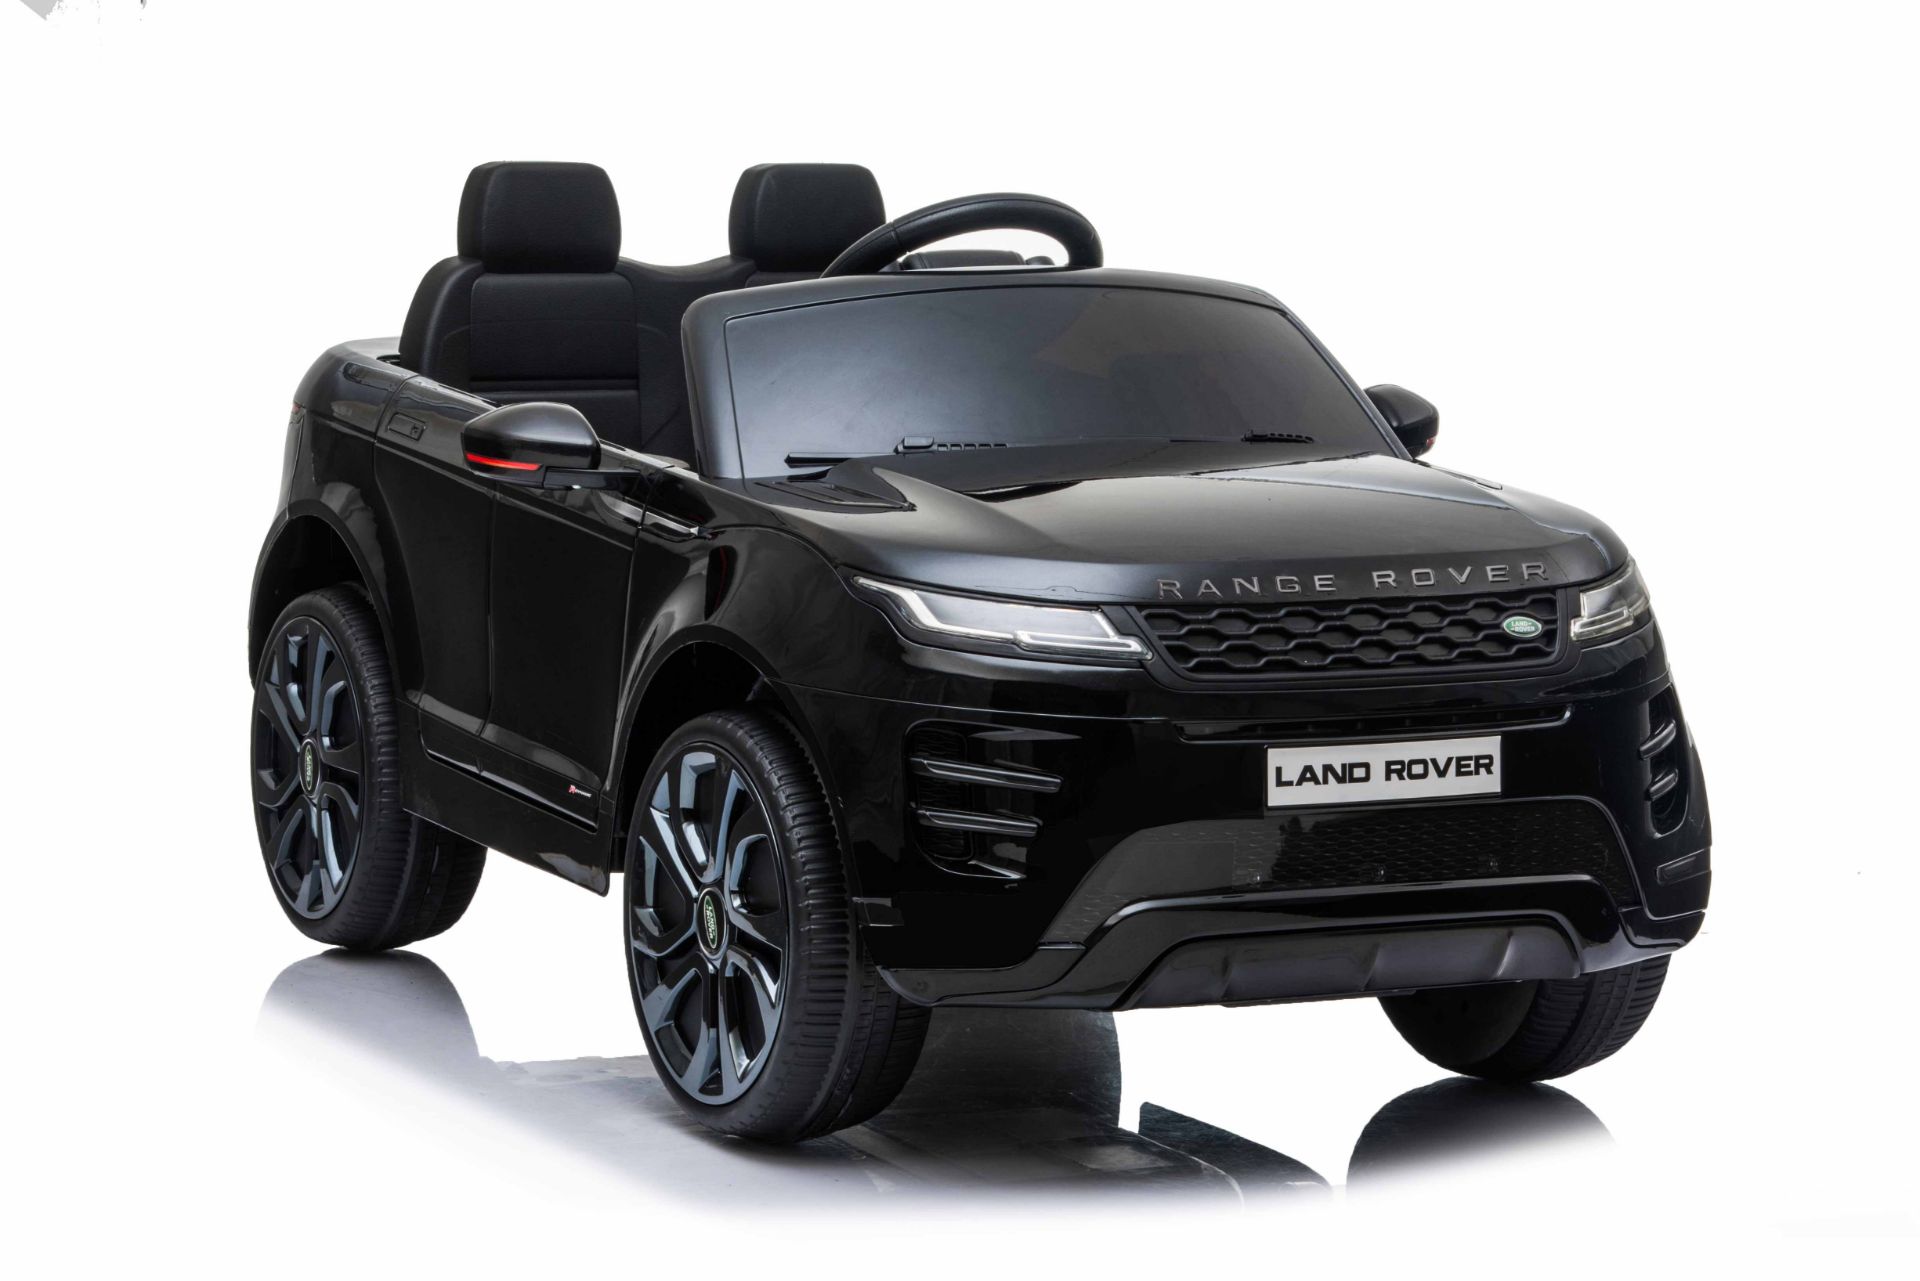 BRAND NEW Ride On Fully Licenced Range Rover Evoque 12v w/ Parental Remote Control and Leather Seat